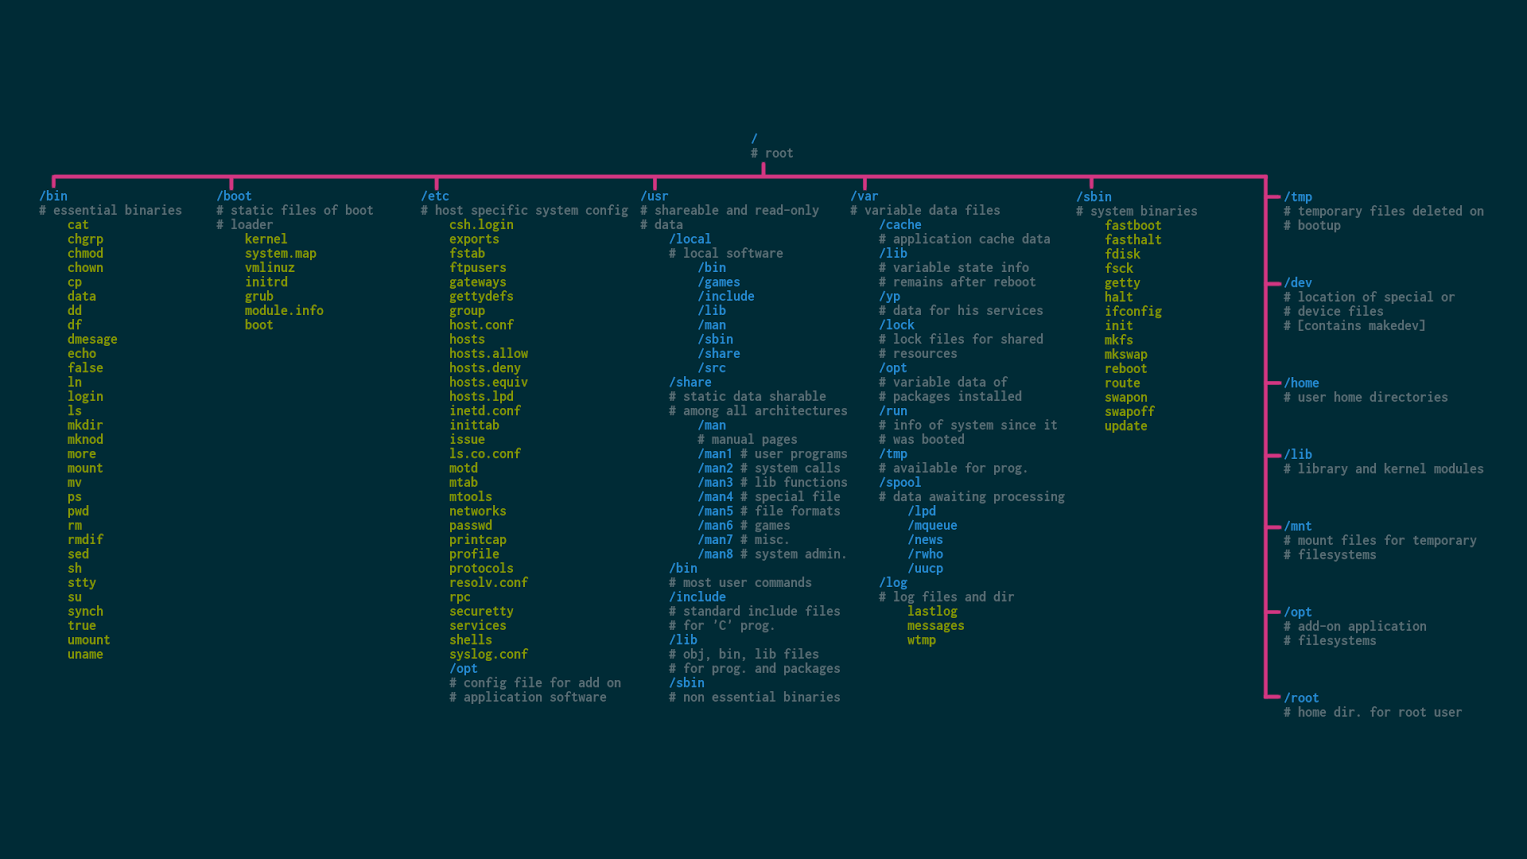 Download Linux Wallpaper That Are Also Cheat Sheets